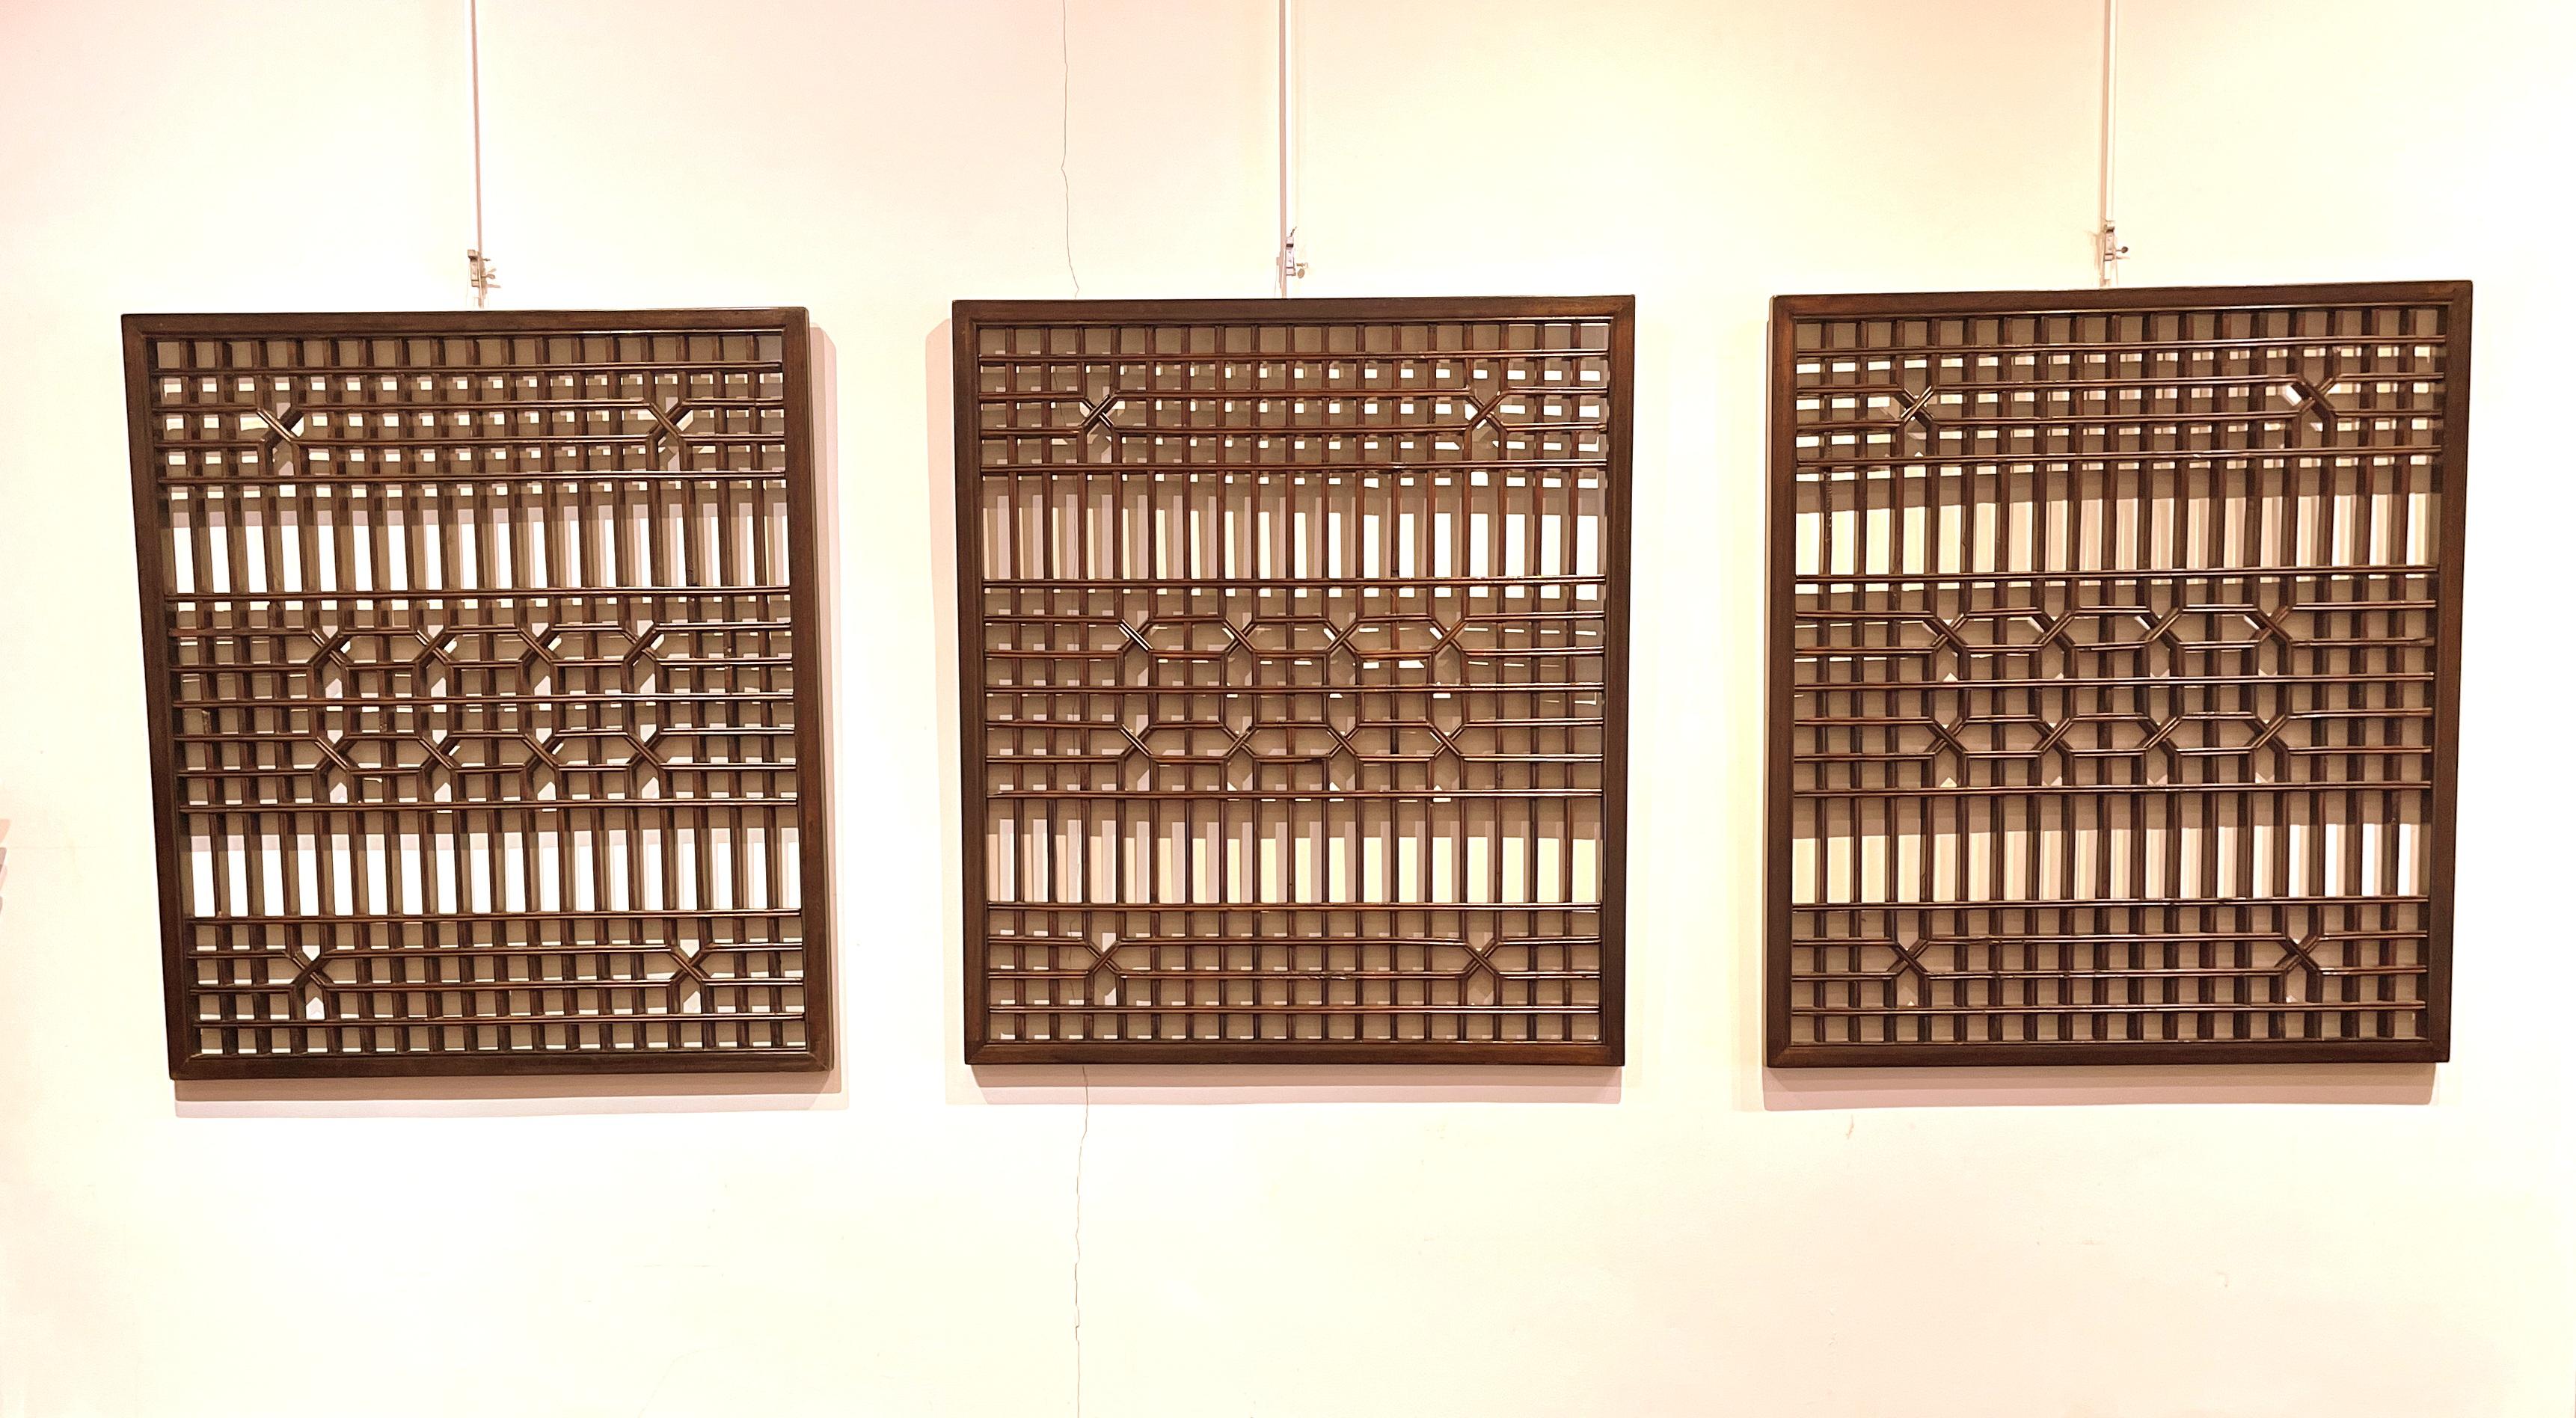 Asian window panels with geometric shapes design. All constructed with joinery techniques.
Photos are shown three window panels and can sell all three window panels once or can sell a single window panel individually. Price here is shown for each